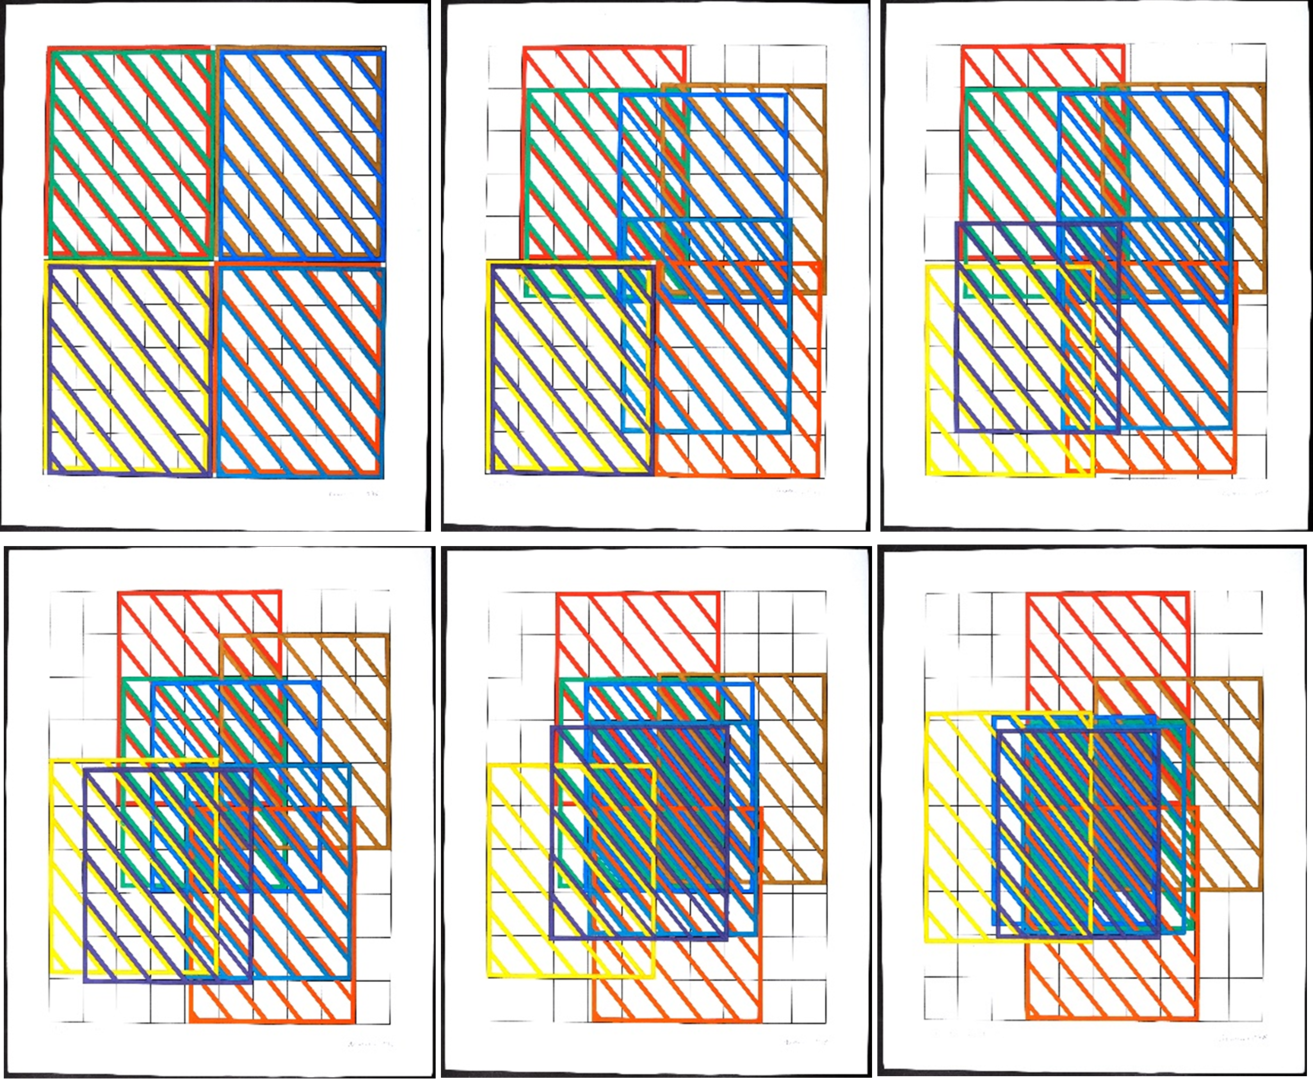 6 different Dora Maurer drawings of grids with intersecting colors